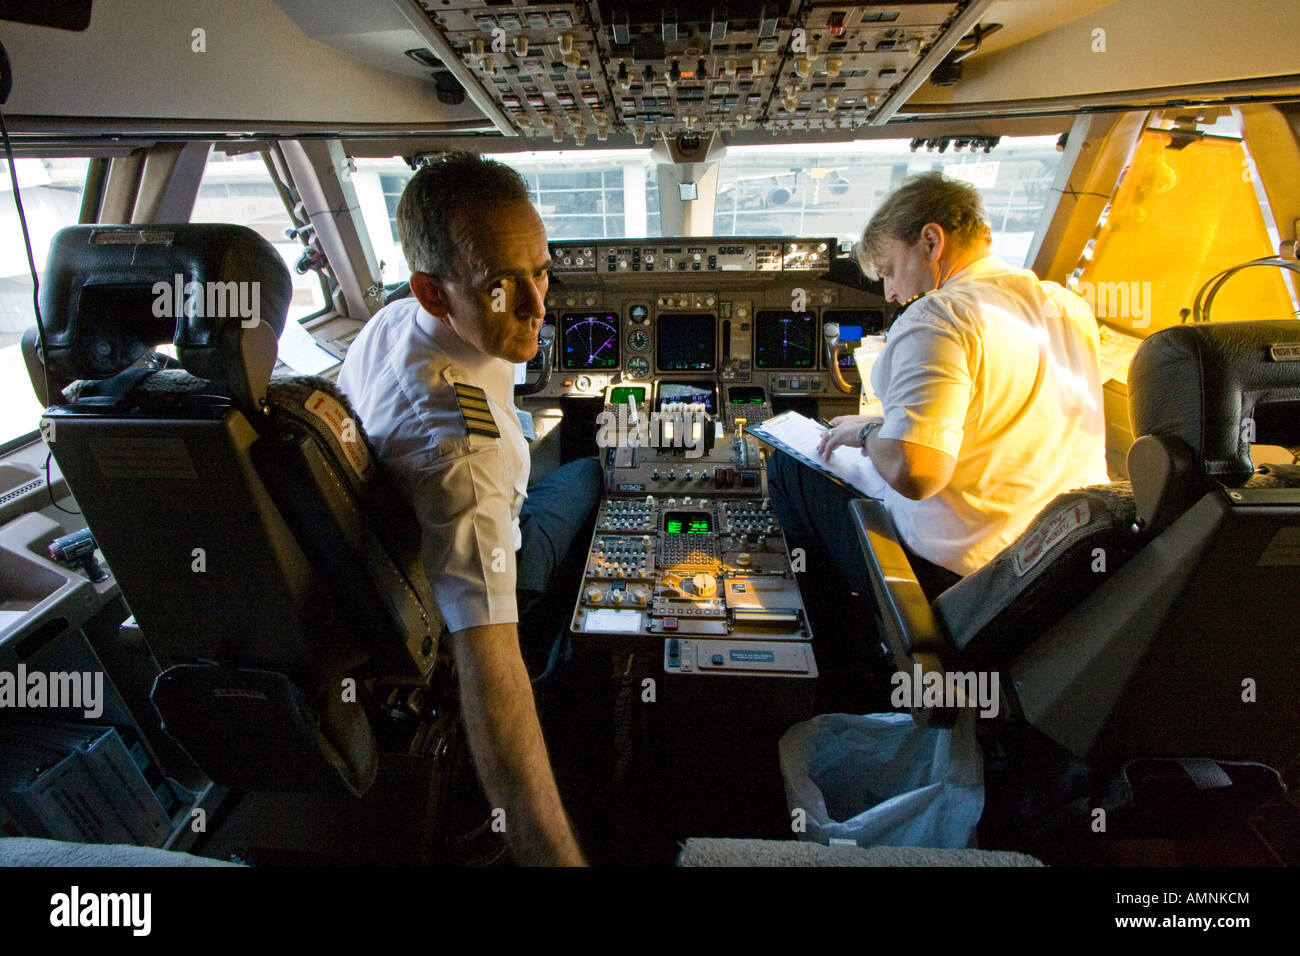 Captain and Crew in the Cockpit of a Cathay Airway 747 Boeing Commercial Jet Airplane Stock Photo